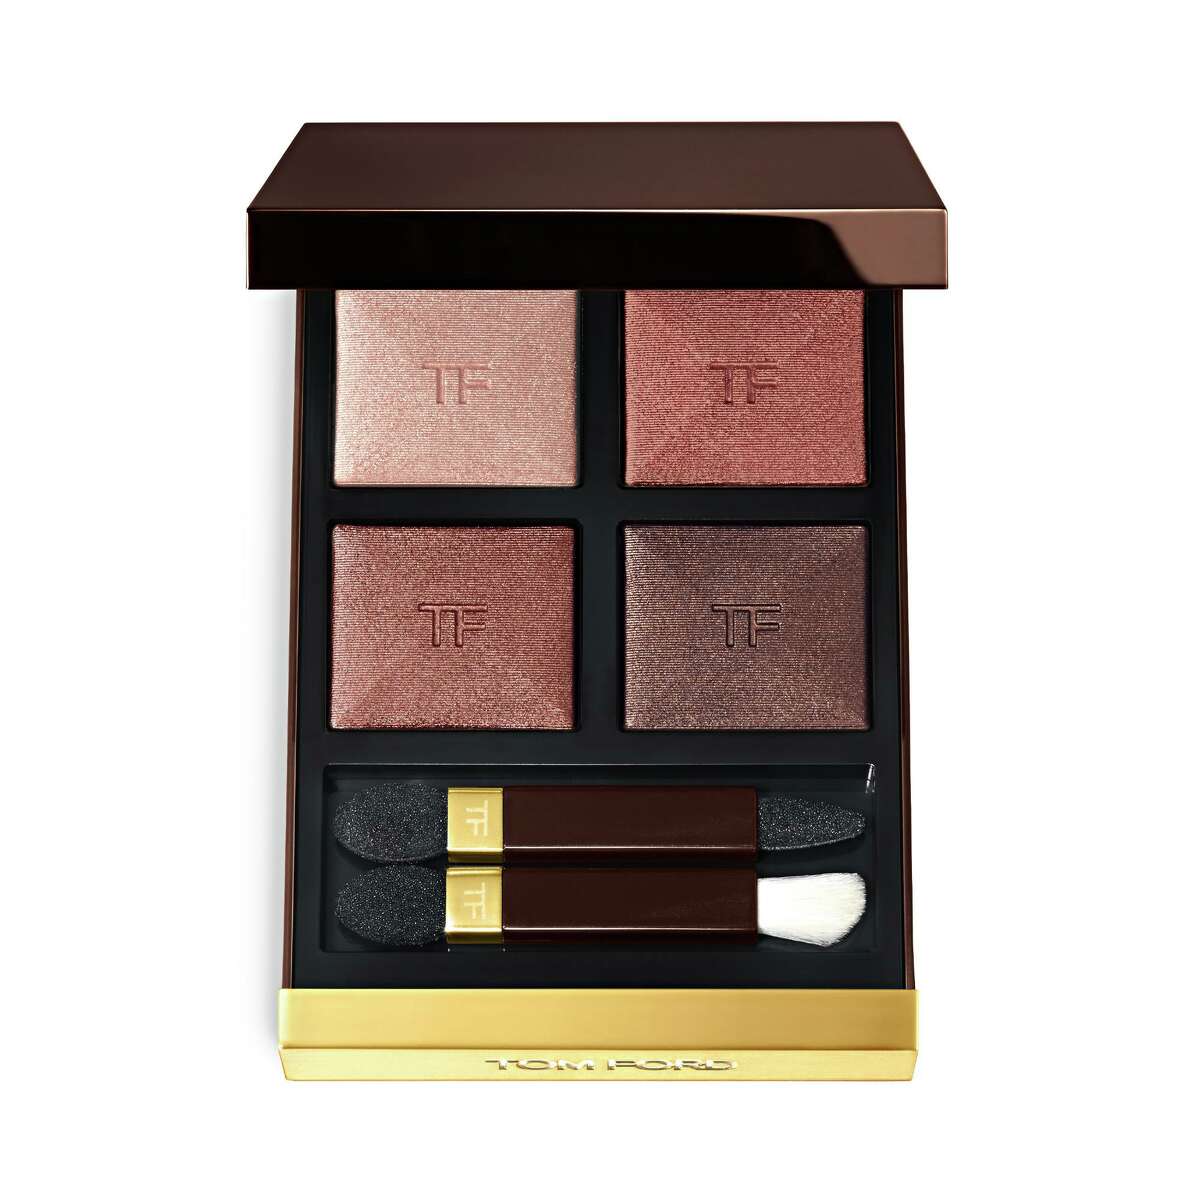 Tom Ford Eye Color Quads come in a variety of palette shades including “Body Heat" shimmers.